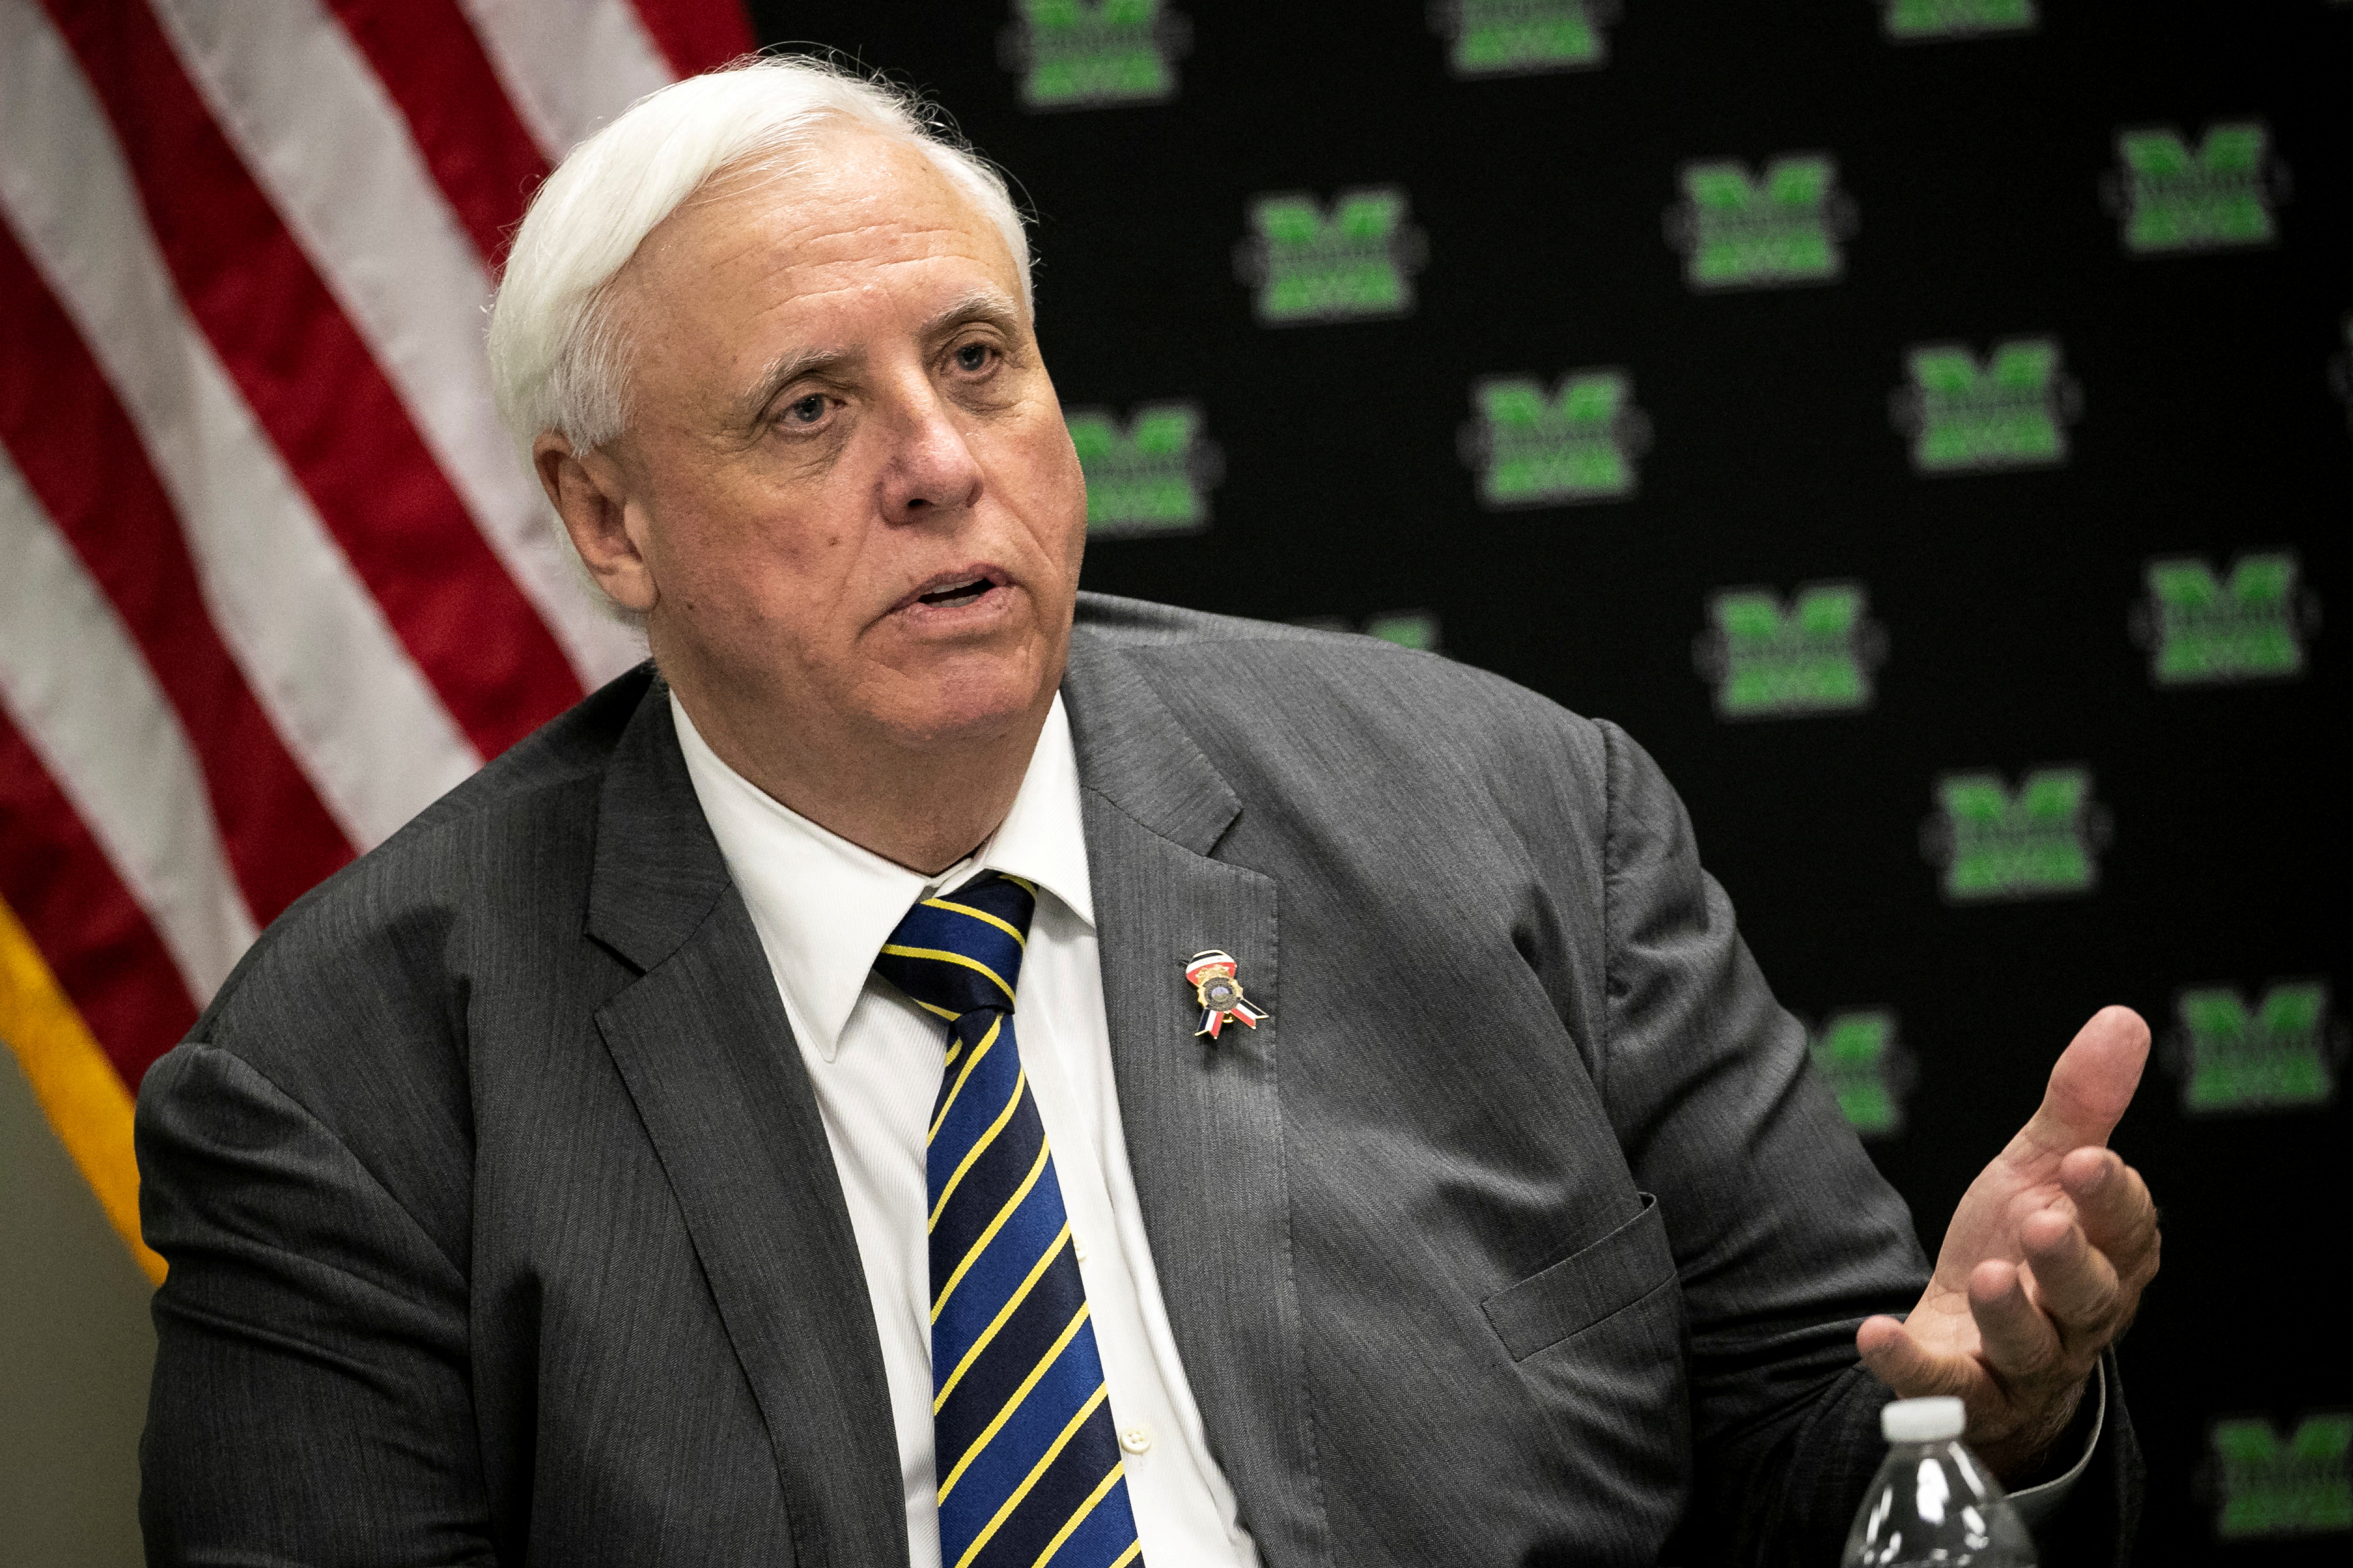 Jim Justice II, Governor of West Virginia, speaks during a roundtable discussion with U.S. first lady Melania Trump, local and state leaders at Cabell-Huntington Health Department in Huntington